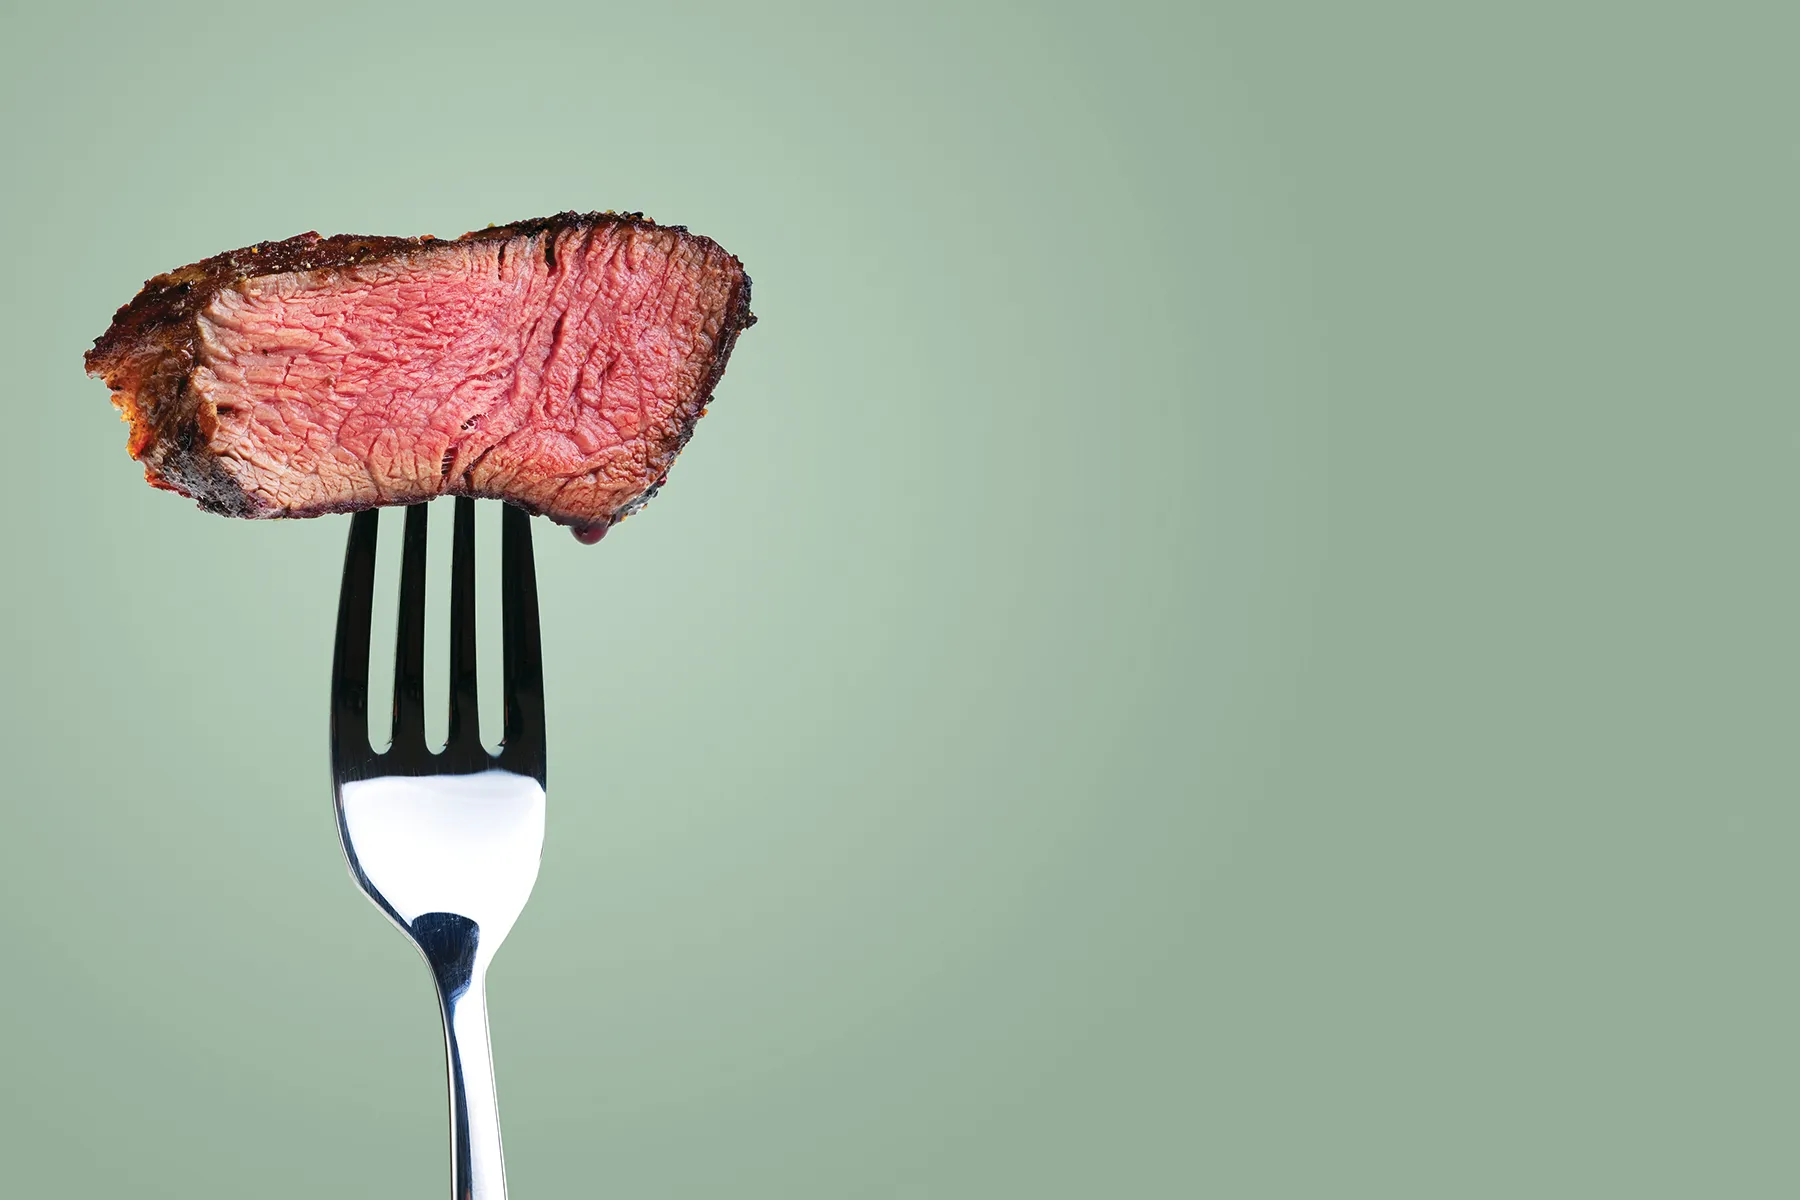 Science Reveals How Red Meat Harms the Heart